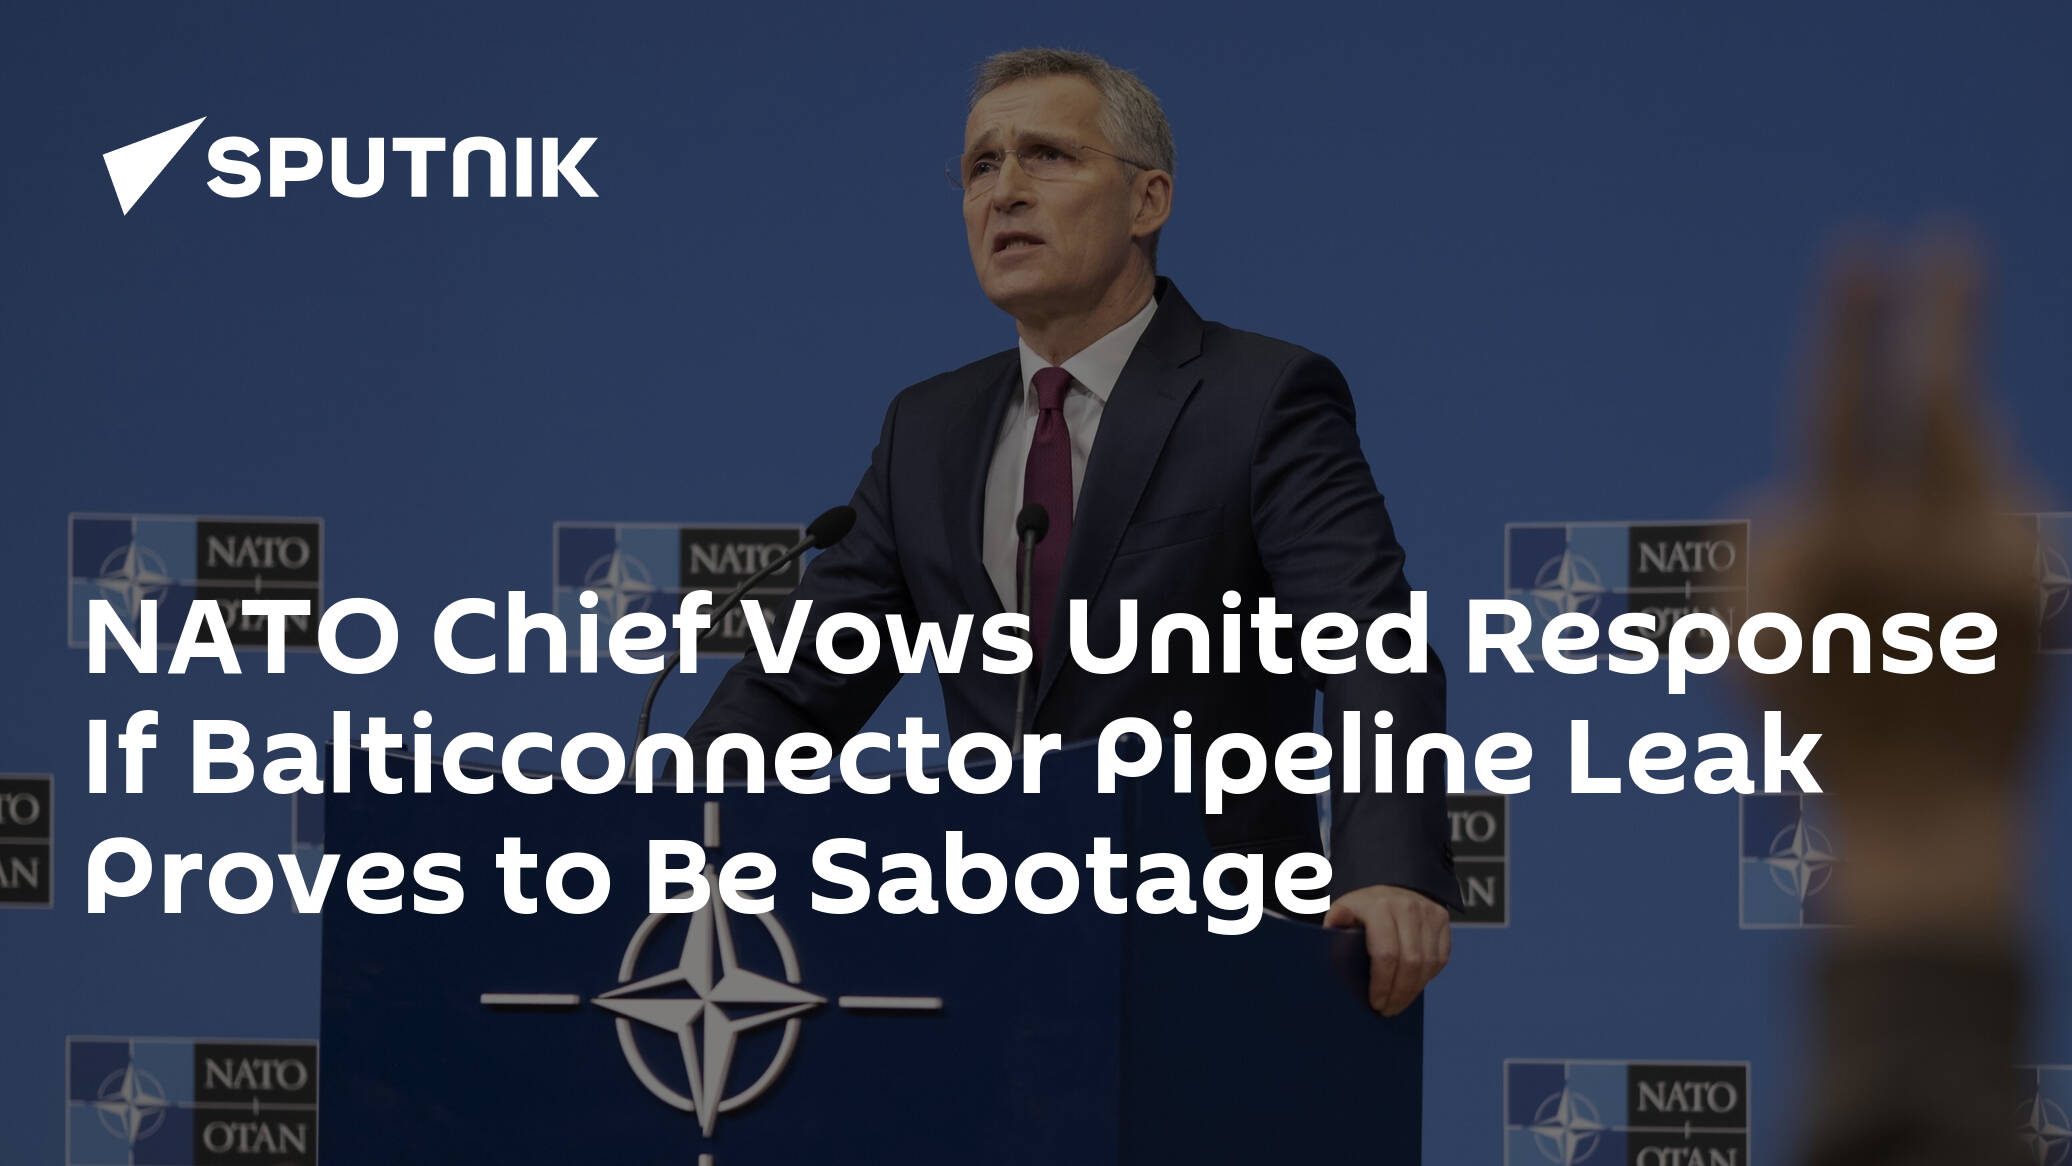 NATO Chief Vows United Response If Balticconnector Pipeline Leak Proves to Be Sabotage